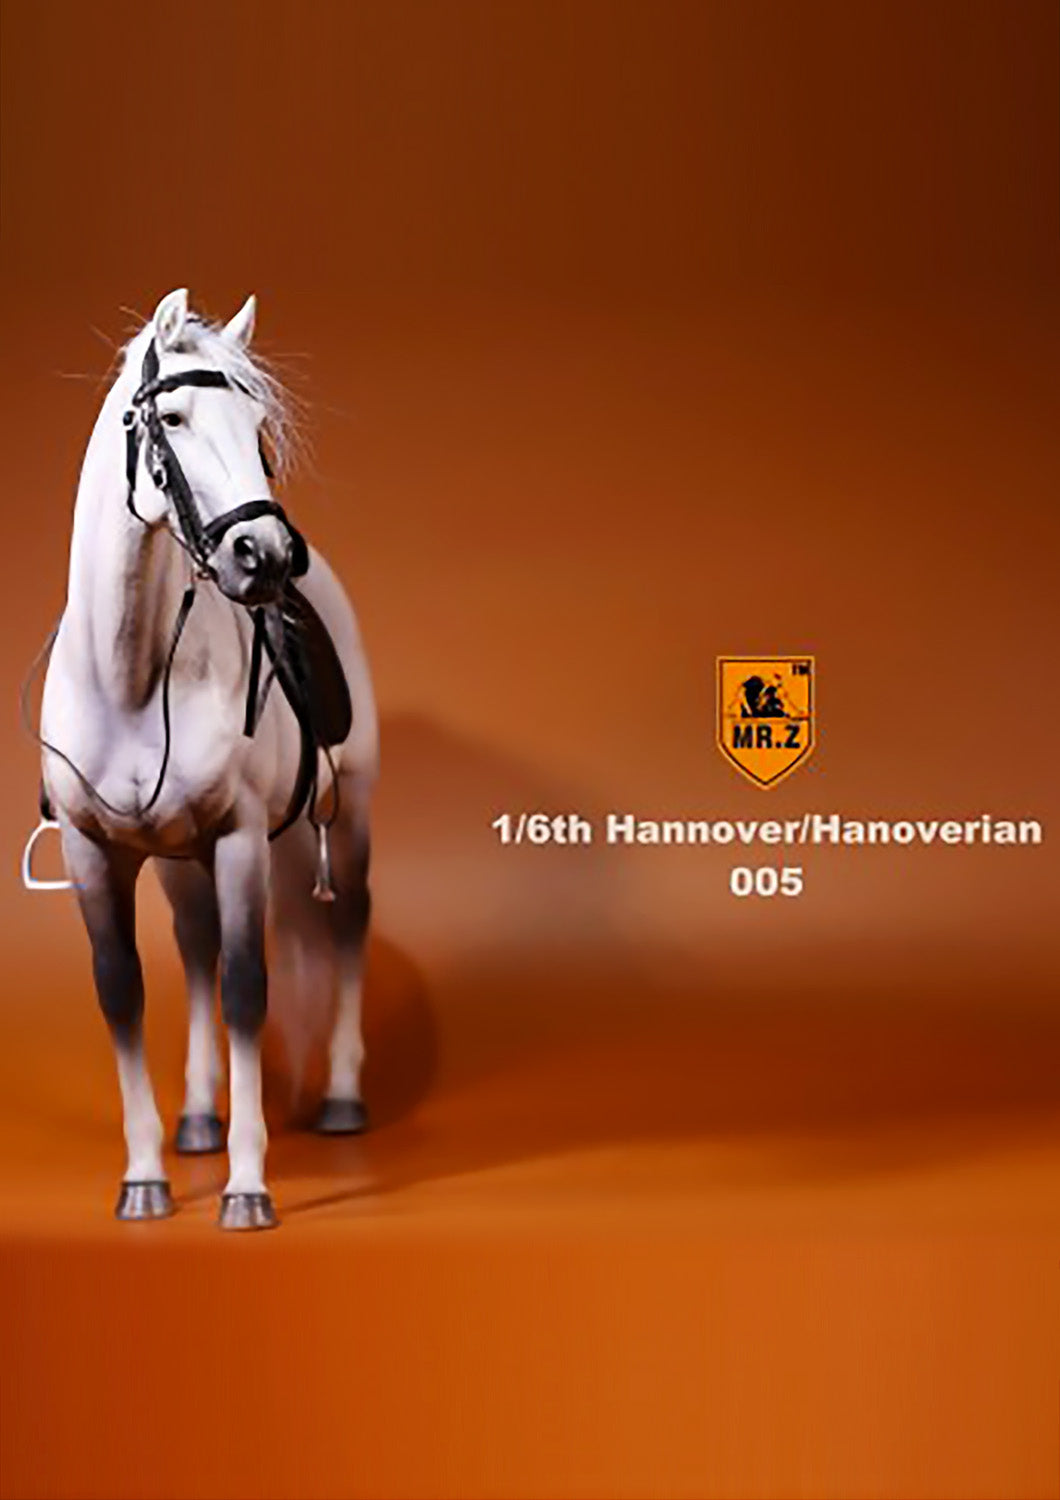 MR.Z REAL ANIMAL SERIES NO.17 1/6TH SCALE GERMAN HANOVERIAN WARMBLOOD HORSE STATUE 005 - Anotoys Collectibles